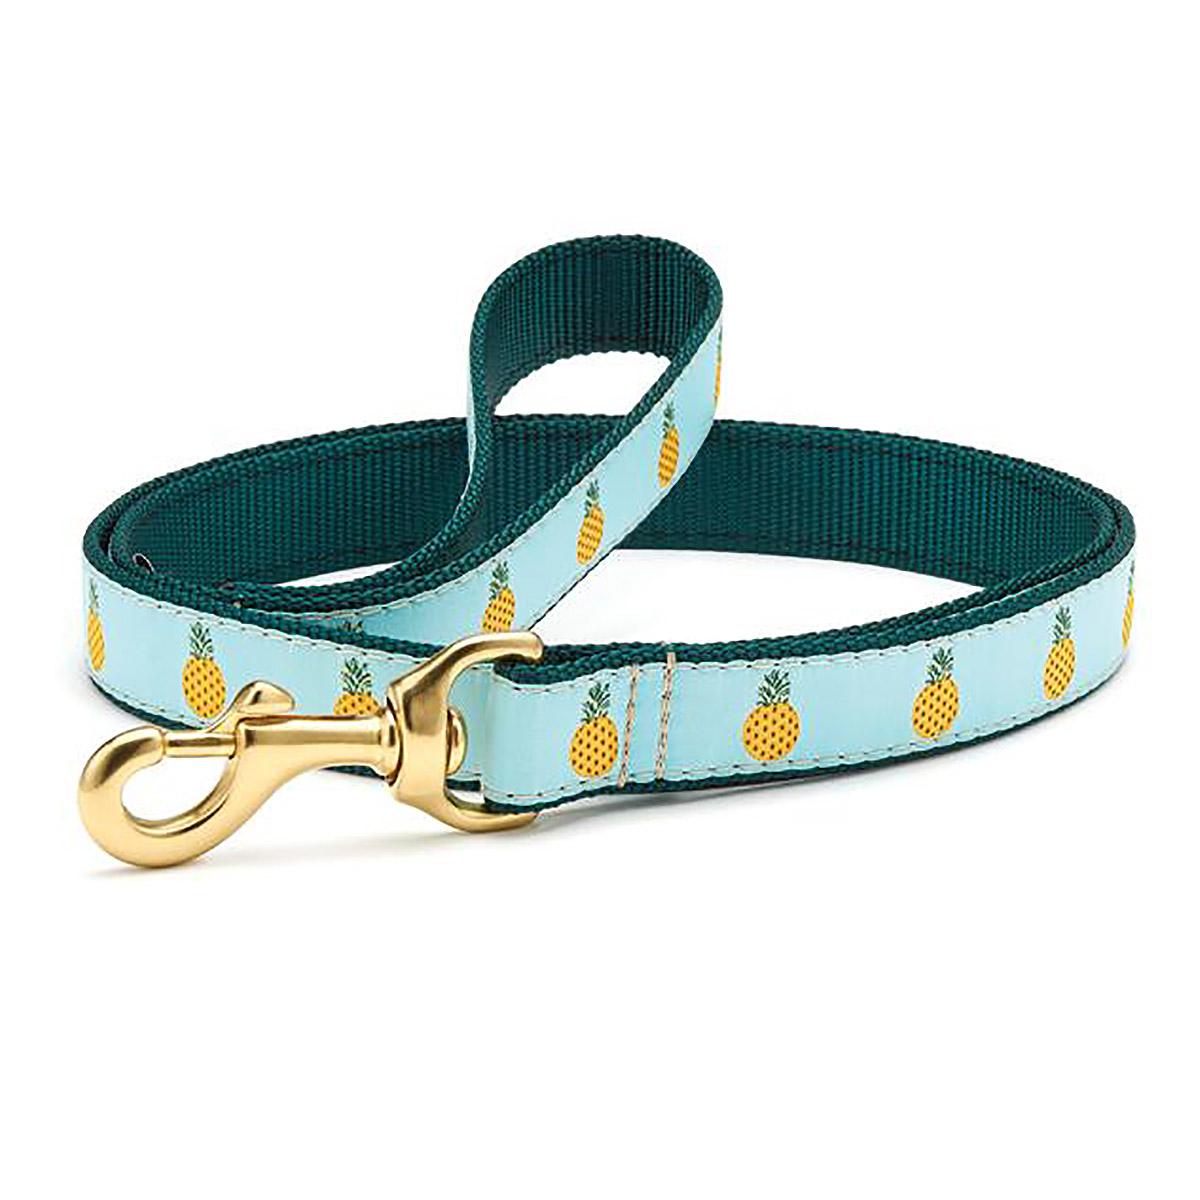 Pineapple Dog Leash by Up Country